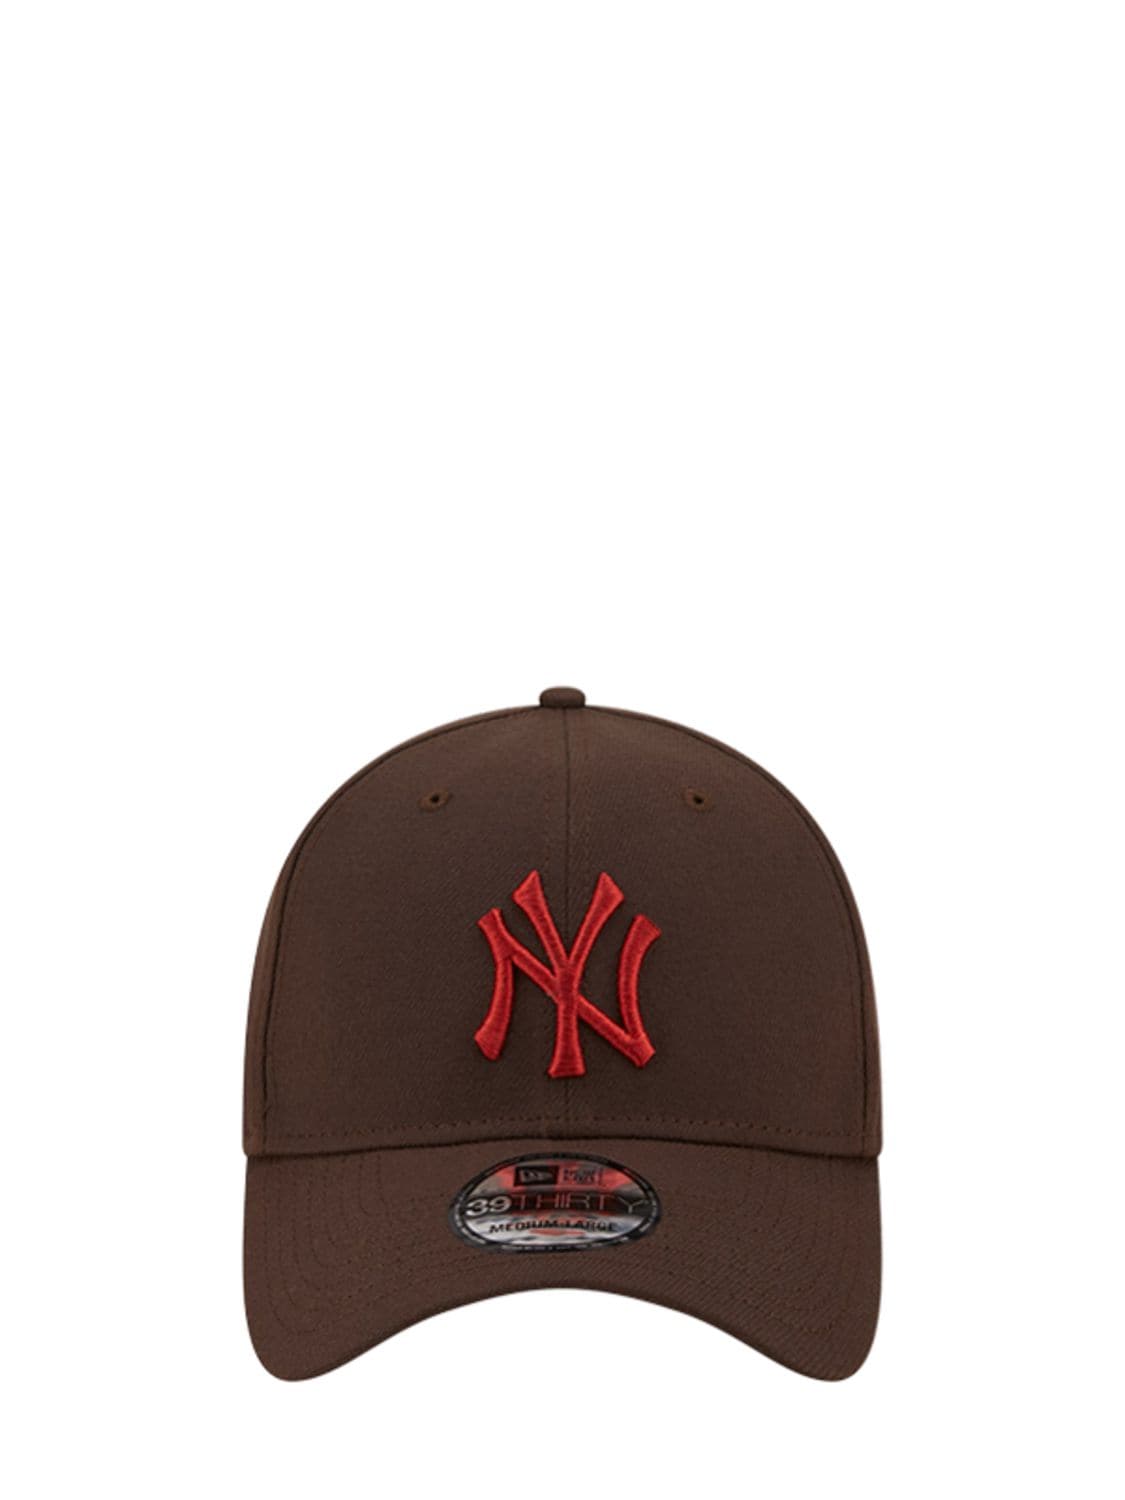 New Era 39thirty Ny League Essential Cap In Brown